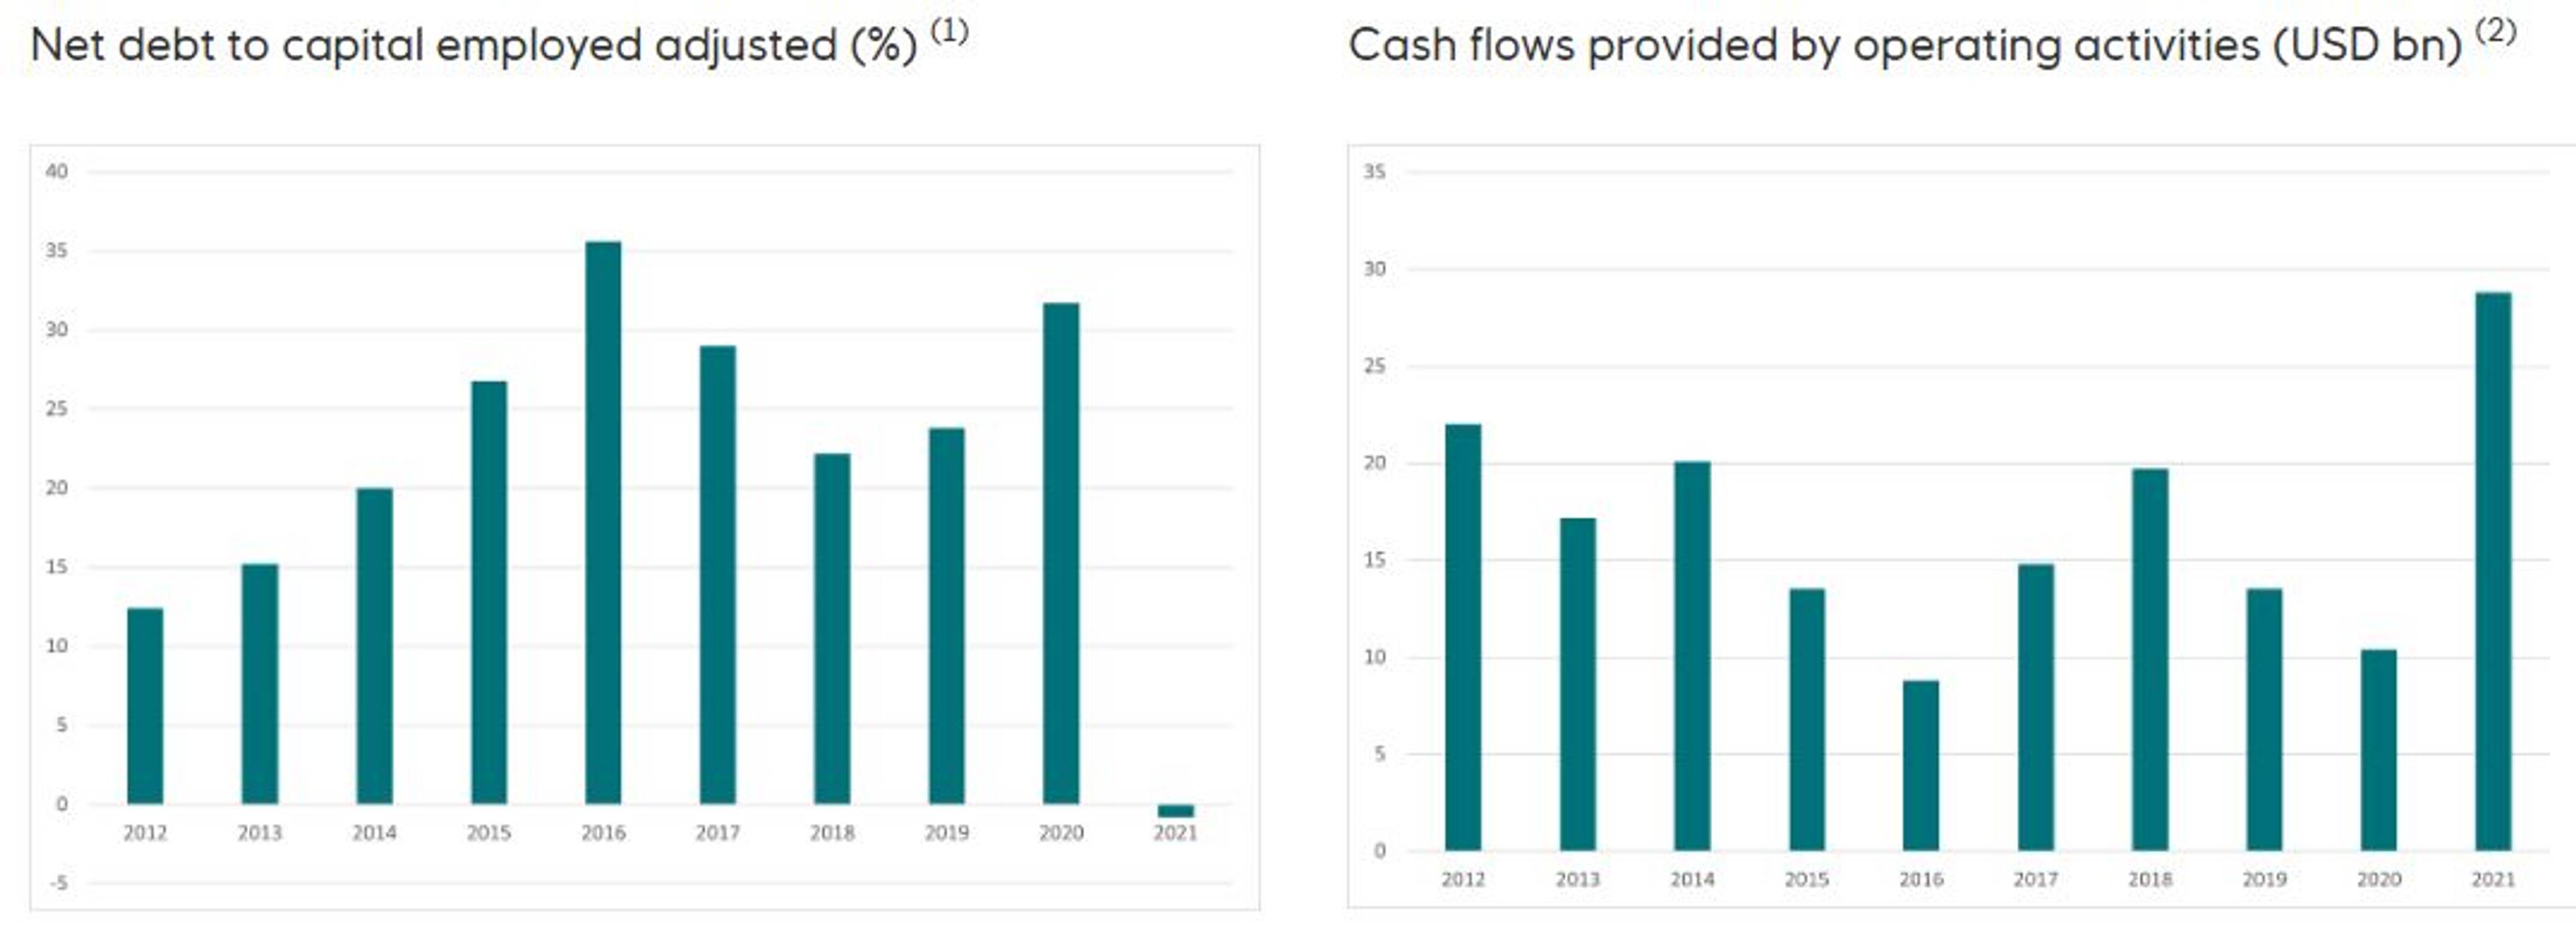 Graphs: Net debt to capital employed adjusted (%); Cash flows provided by operating activities (USD bn)